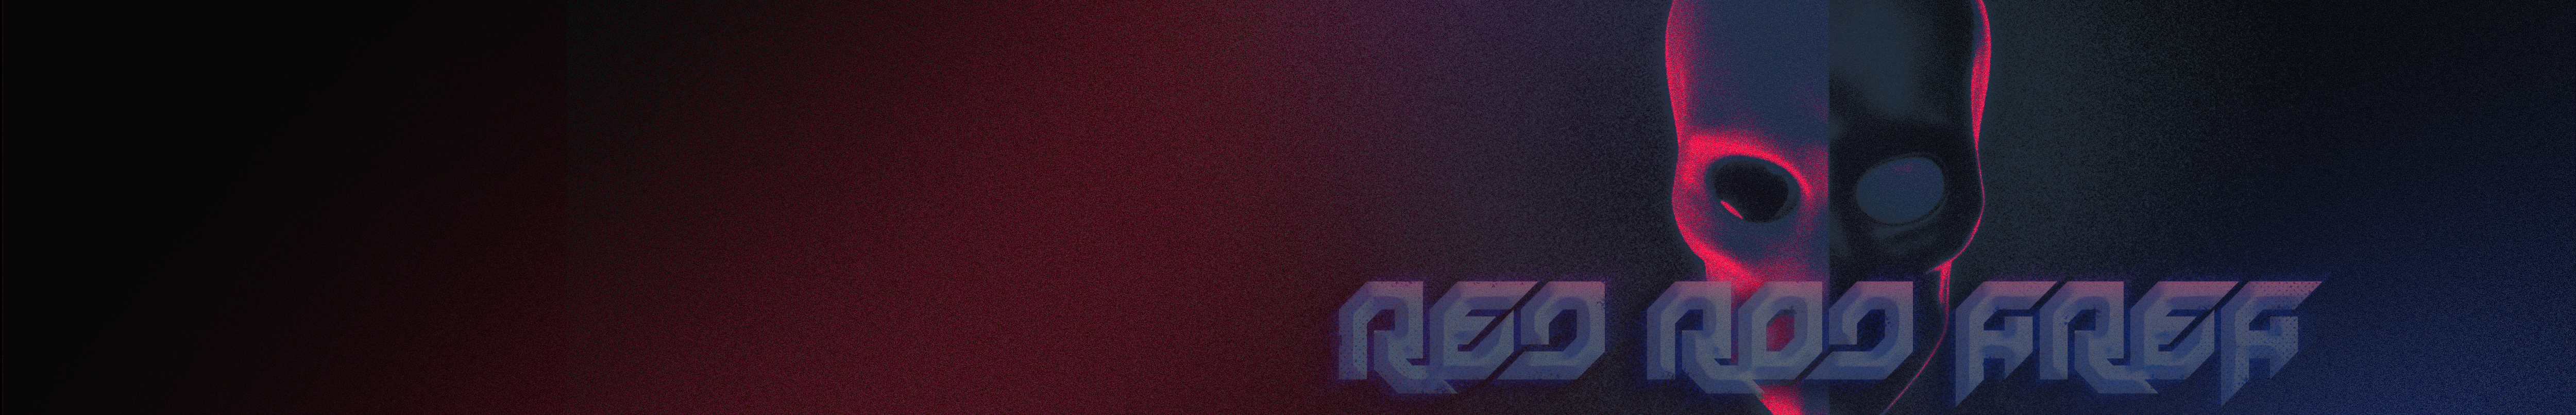 Red Rod Area's profile banner